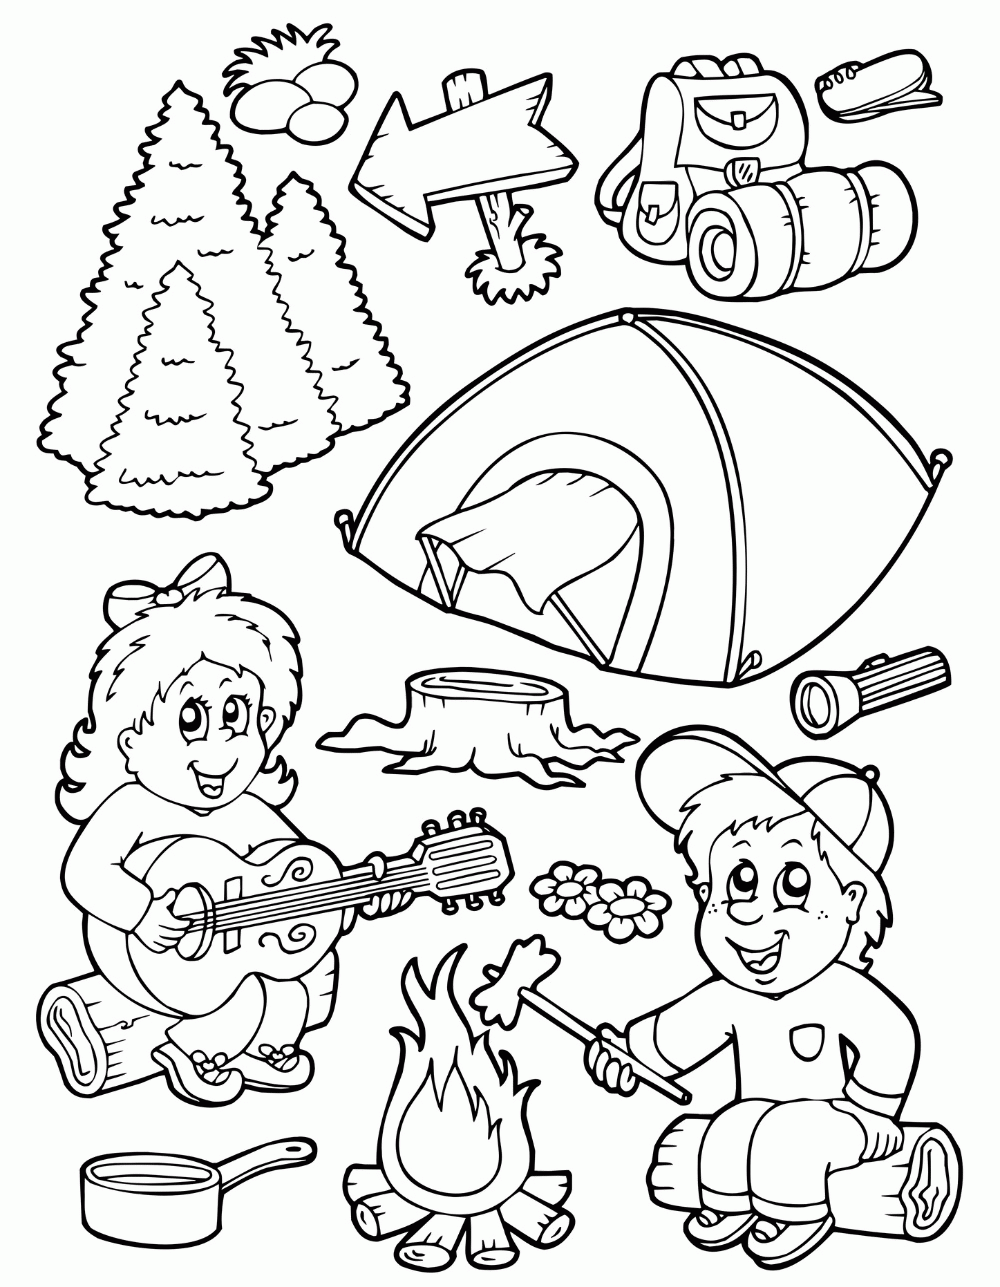 8 Pics of Camping S'more Coloring Pages - S'mores Coloring Pages ...